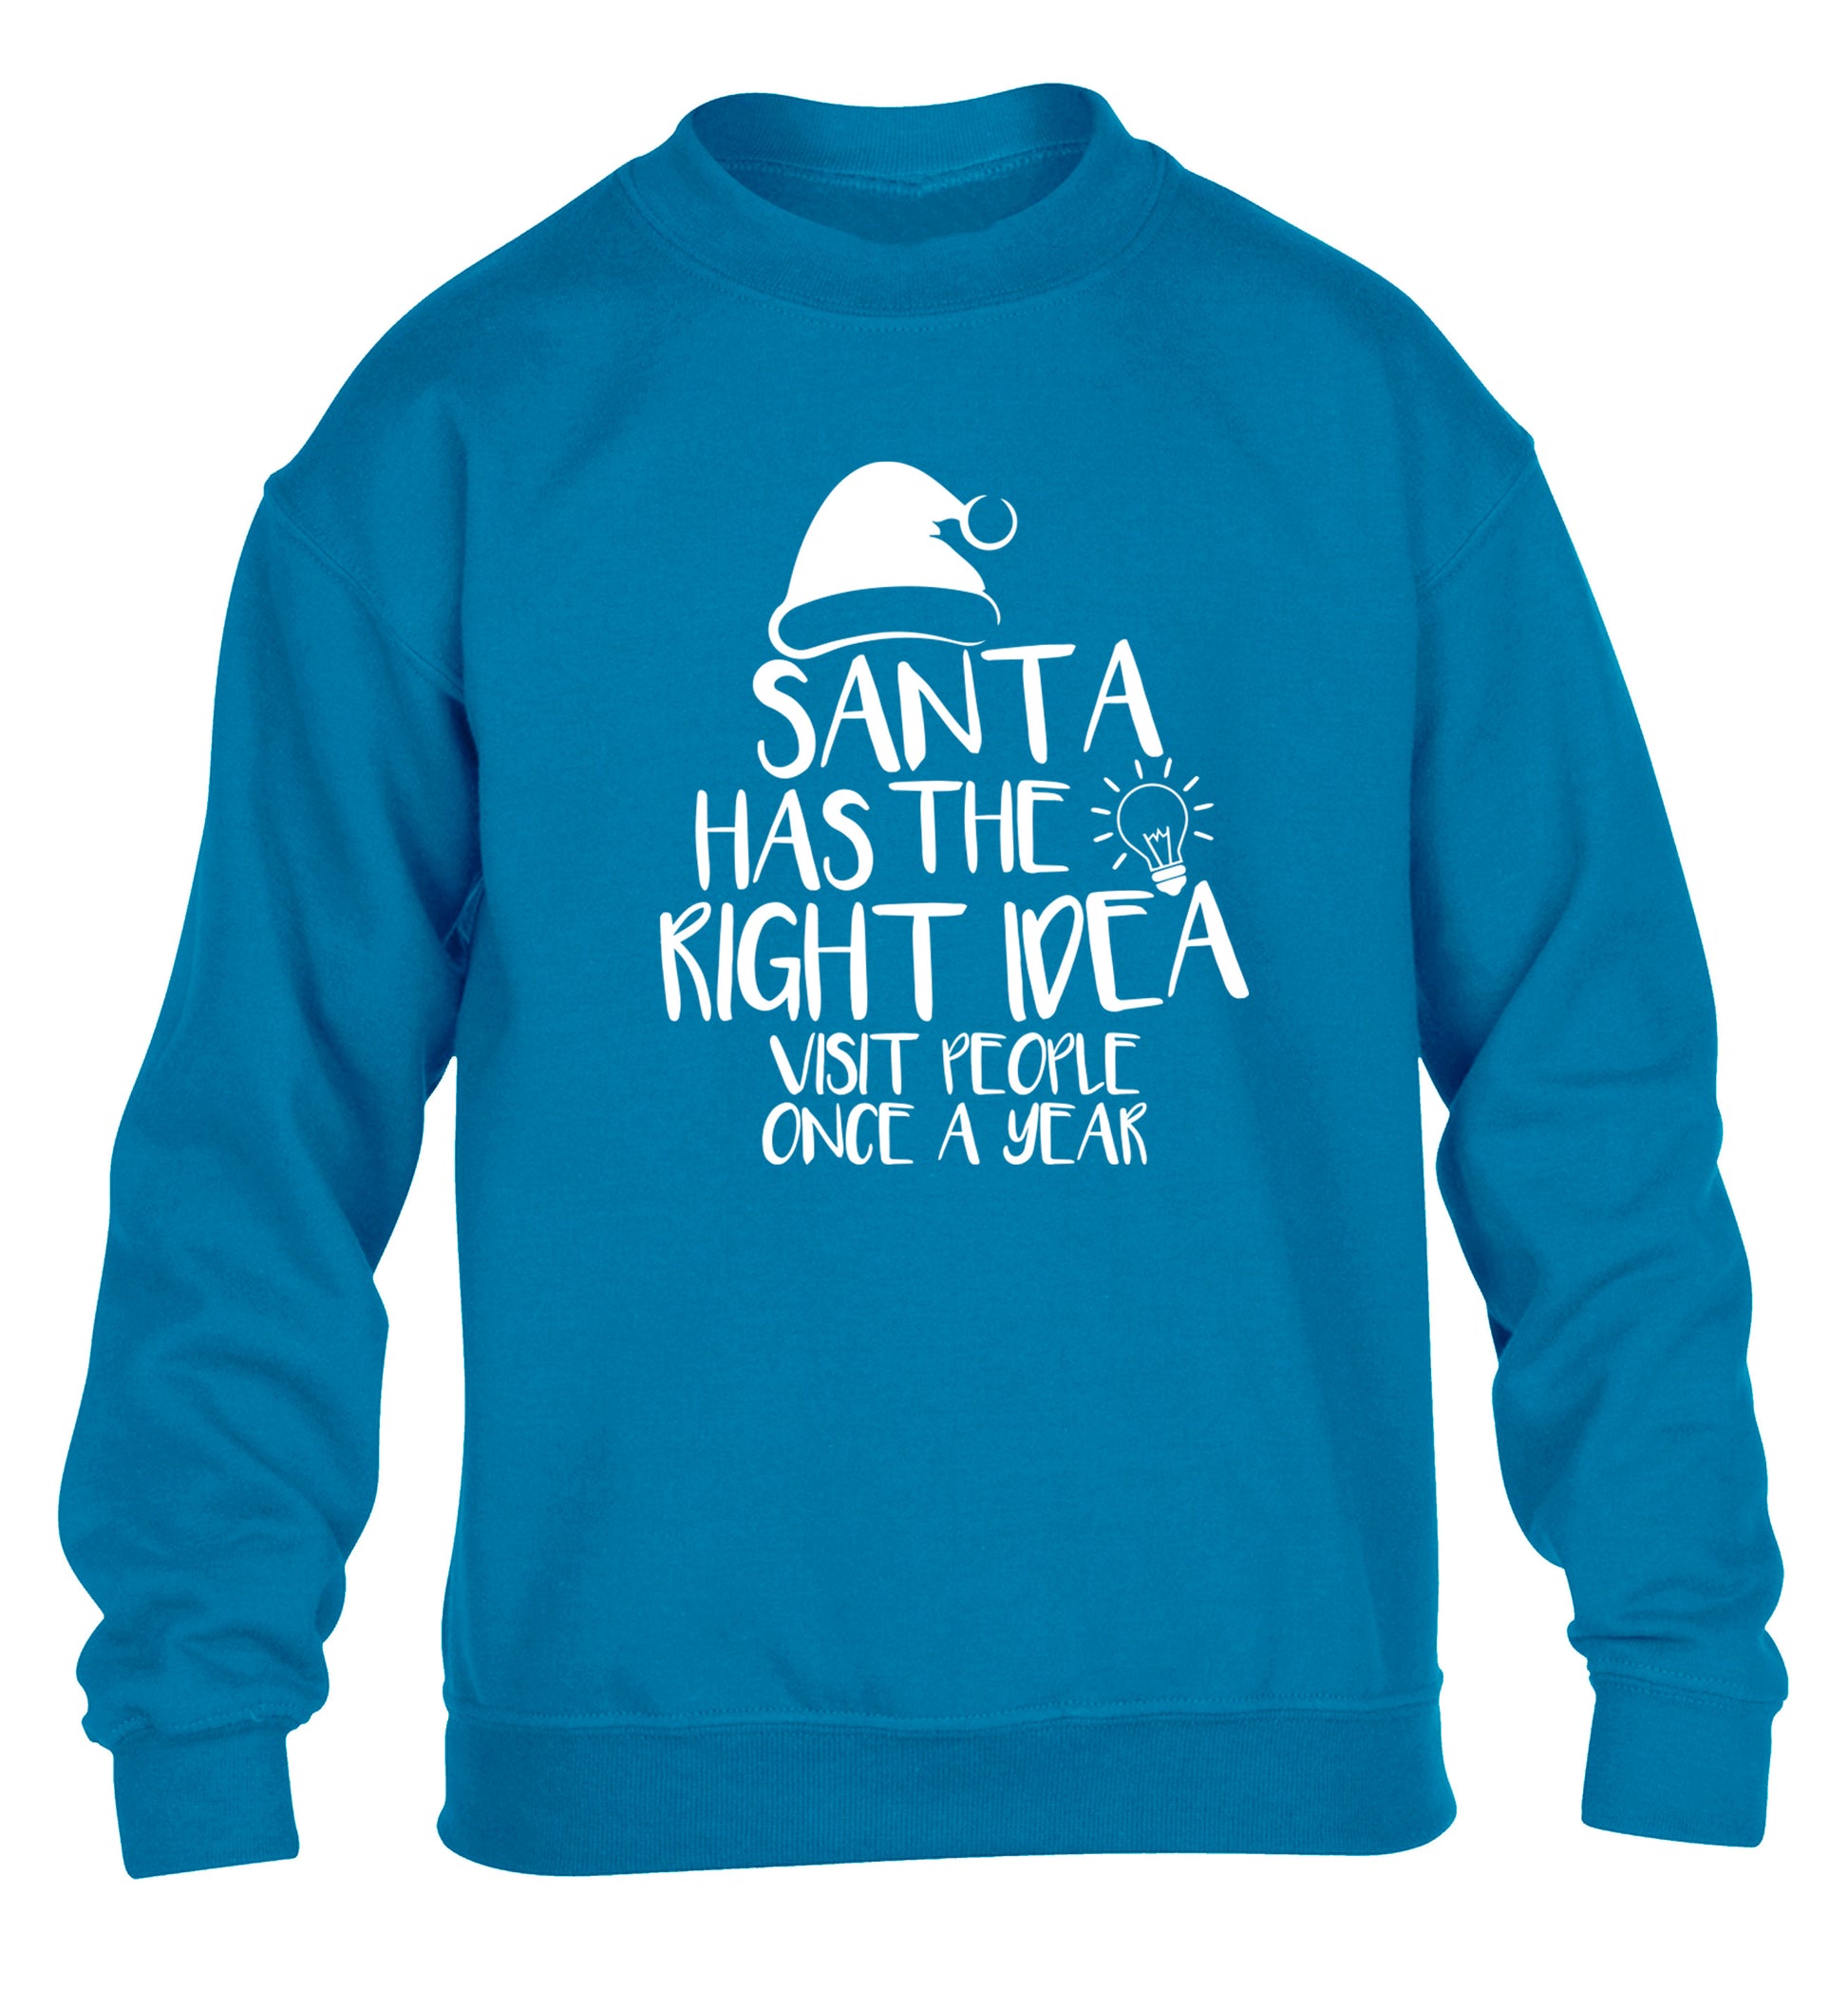 Santa has the right idea visit people once a year children's blue sweater 12-14 Years